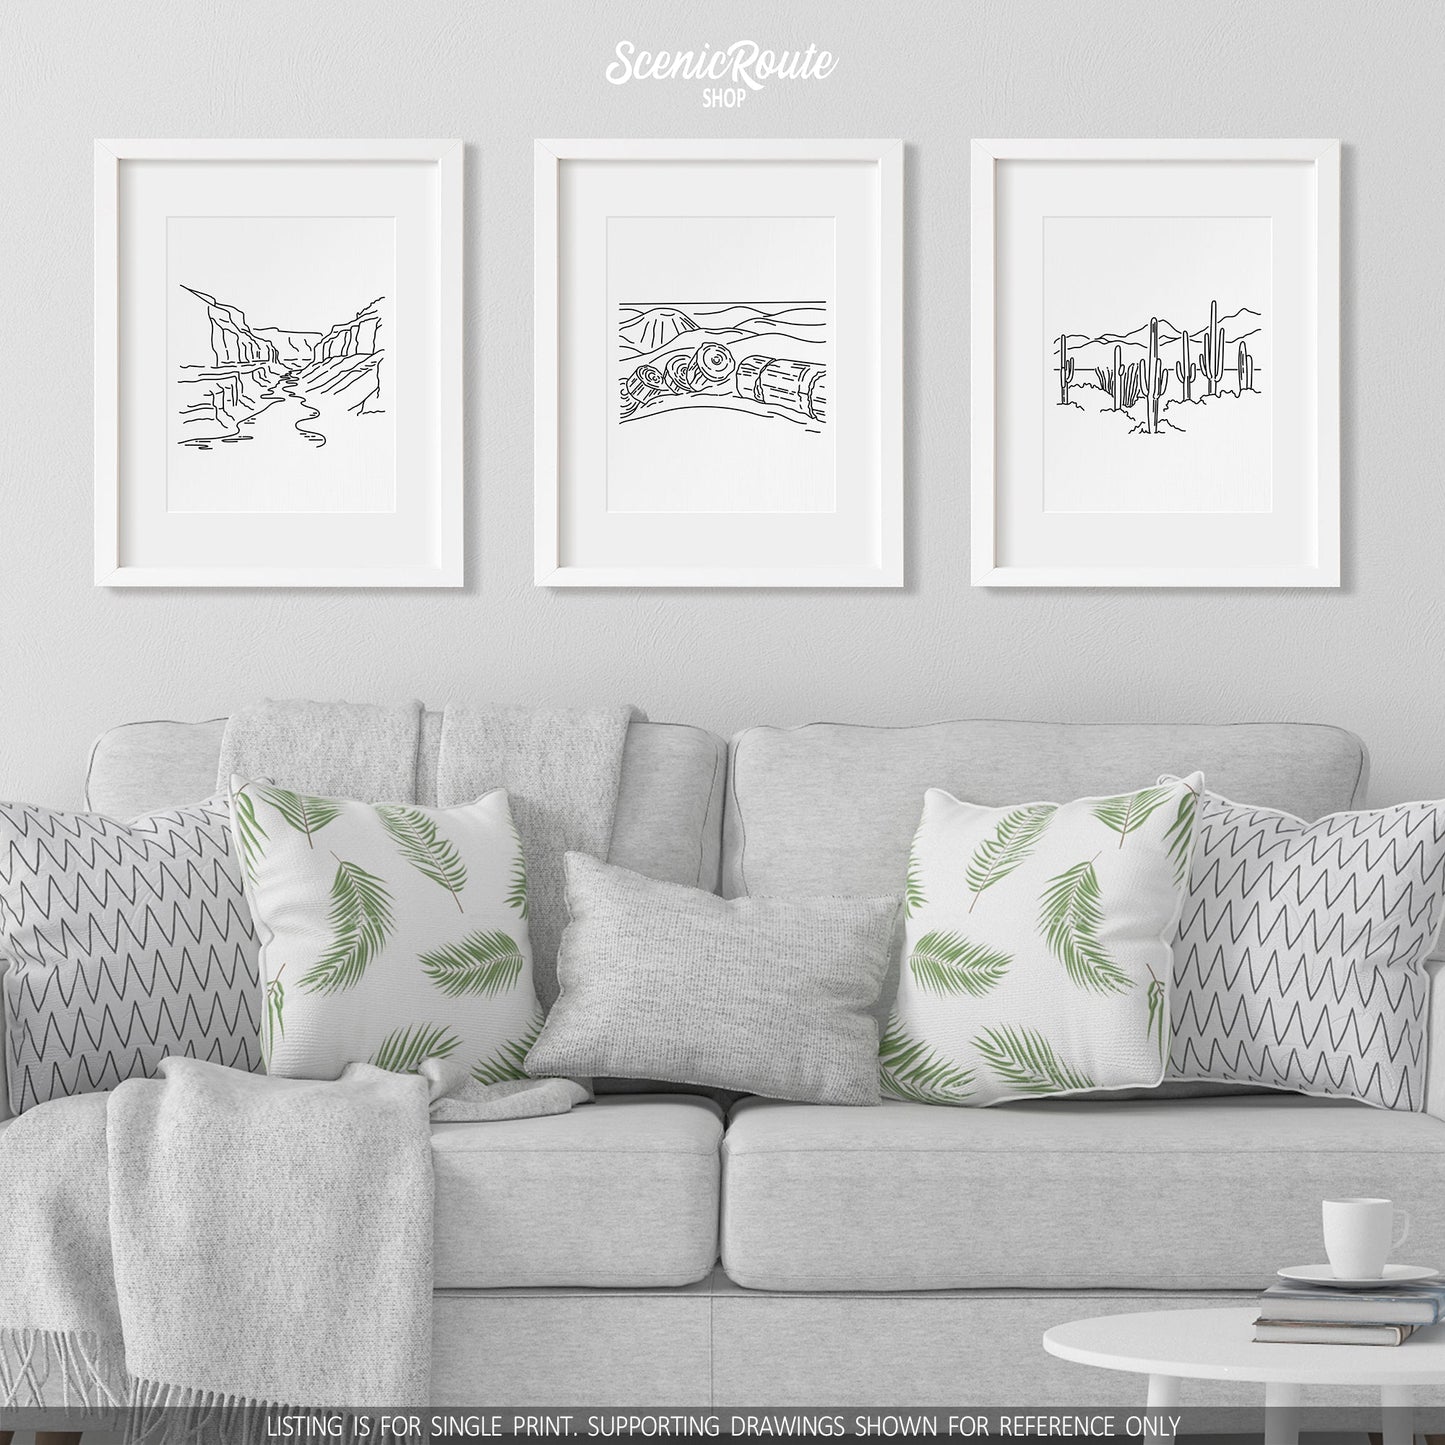 A group of three framed drawings on a white wall hanging above a couch with pillows and a blanket. The line art drawings include the Grand Canyon National Park, Petrified Forest National Park, and Saguaro National Park